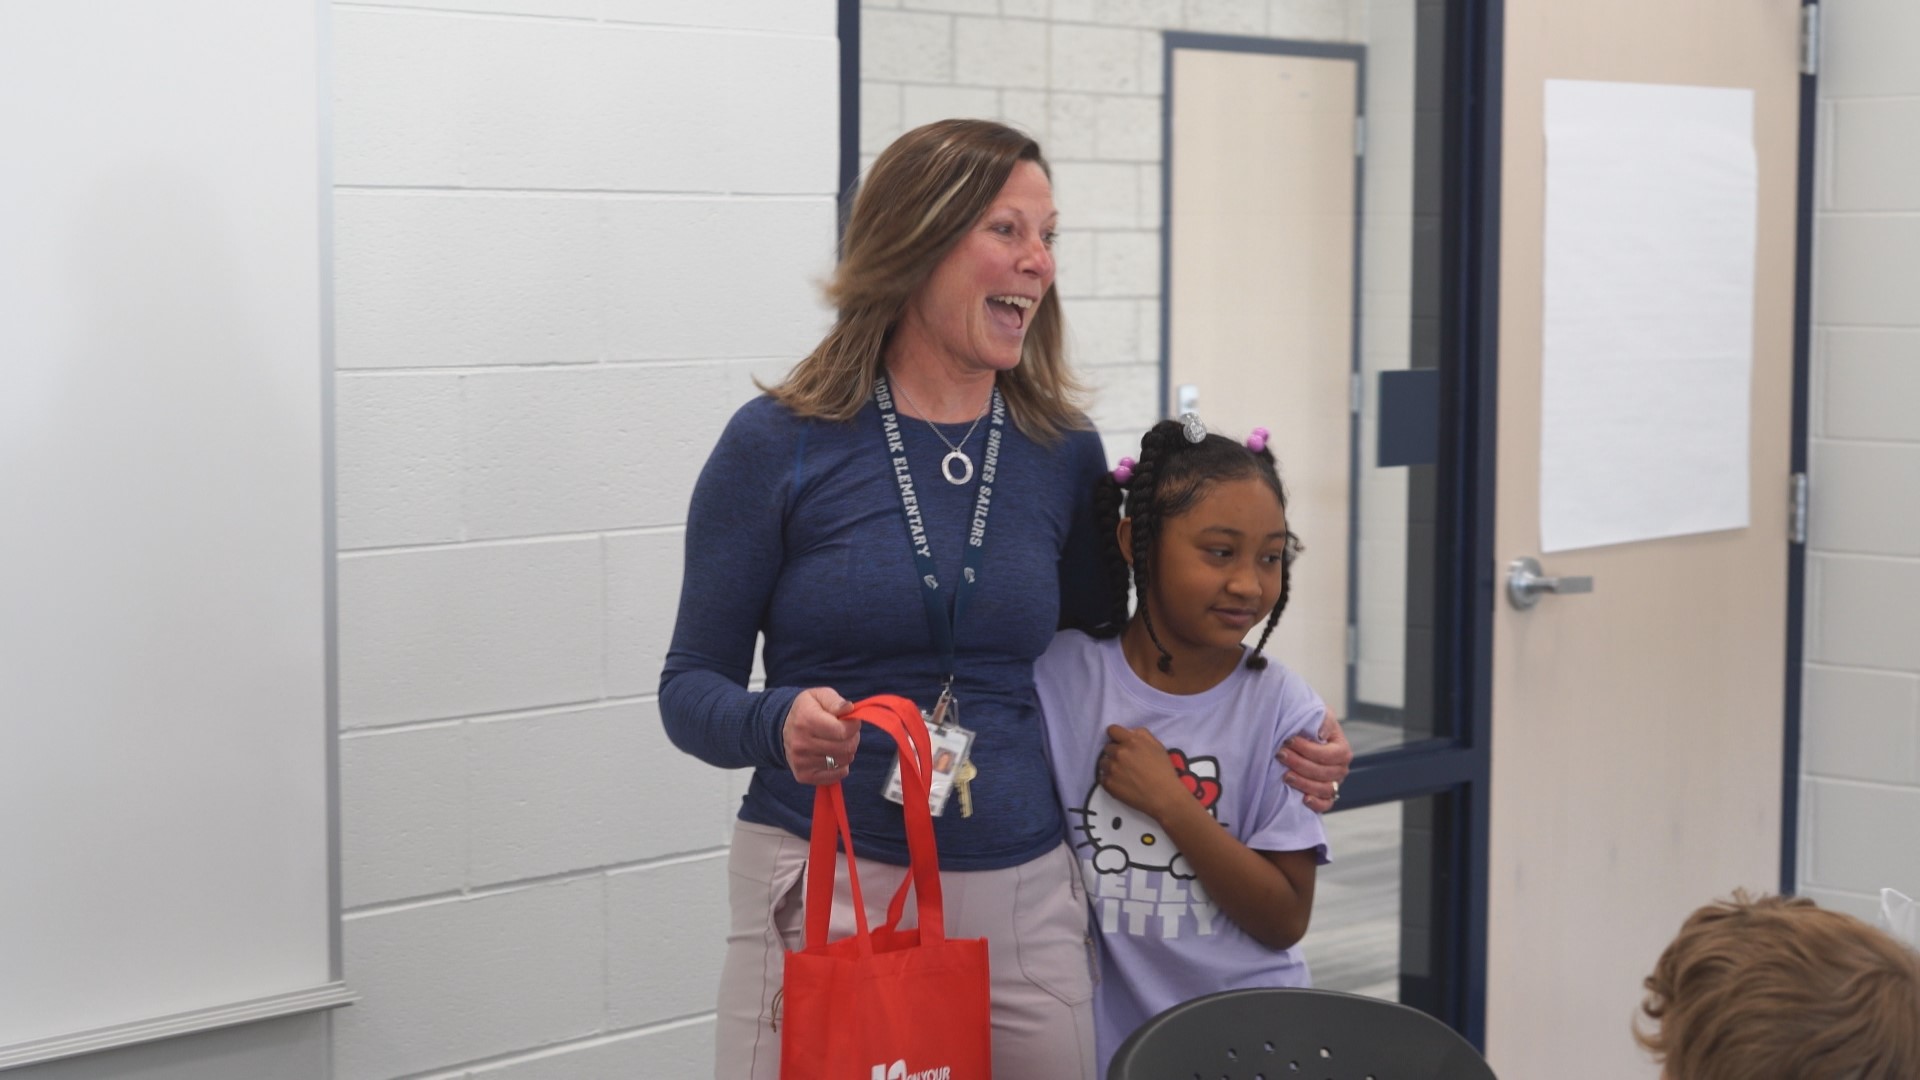 This next Teacher of the Week is touching the lives of students of all ages through her work in the classroom and in the court.